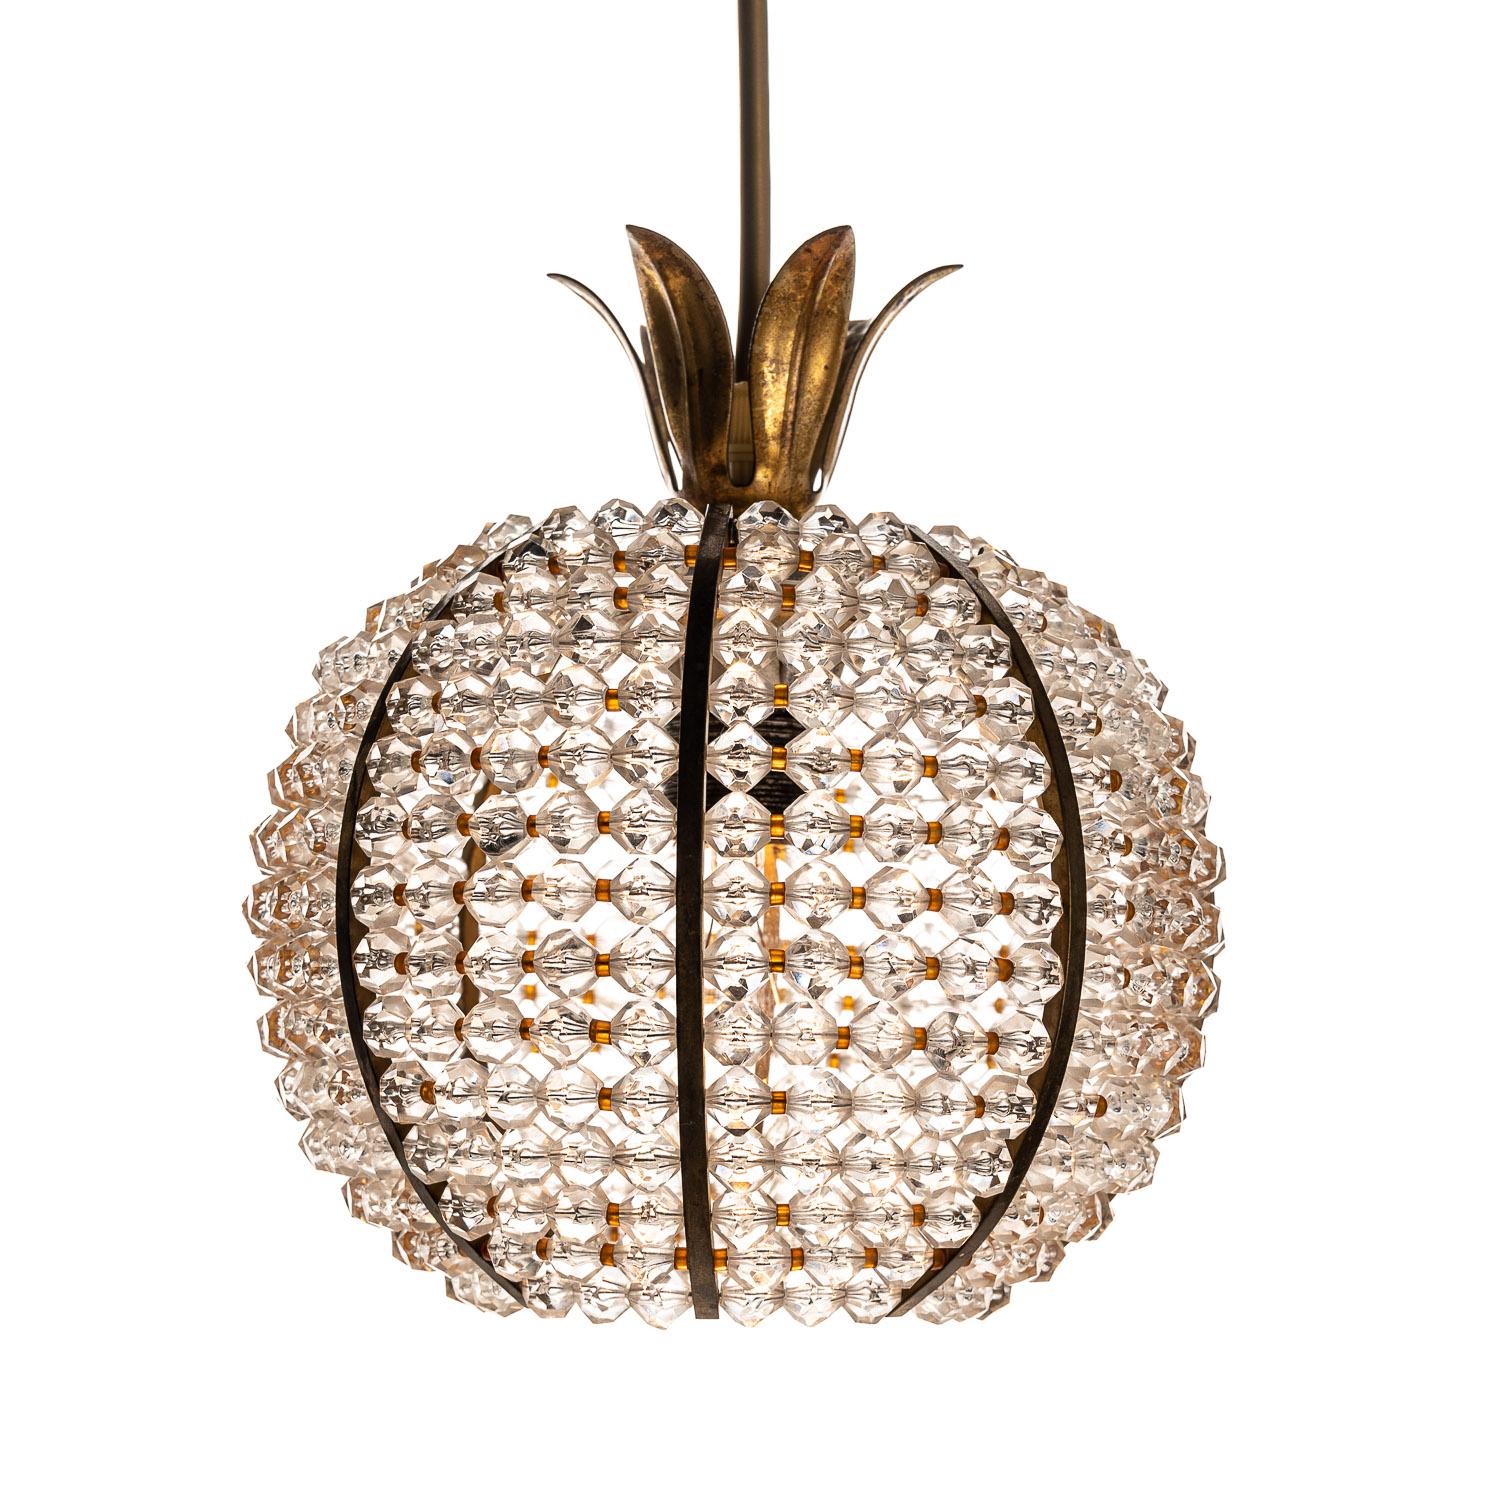 The acrylic beading and contrasting brass elements add an air of opulence to this beautiful light. Height variable up from the light measuring in at 19 cm. As it is now 100cm in height. We have more of the same style, different shapes, in stock.